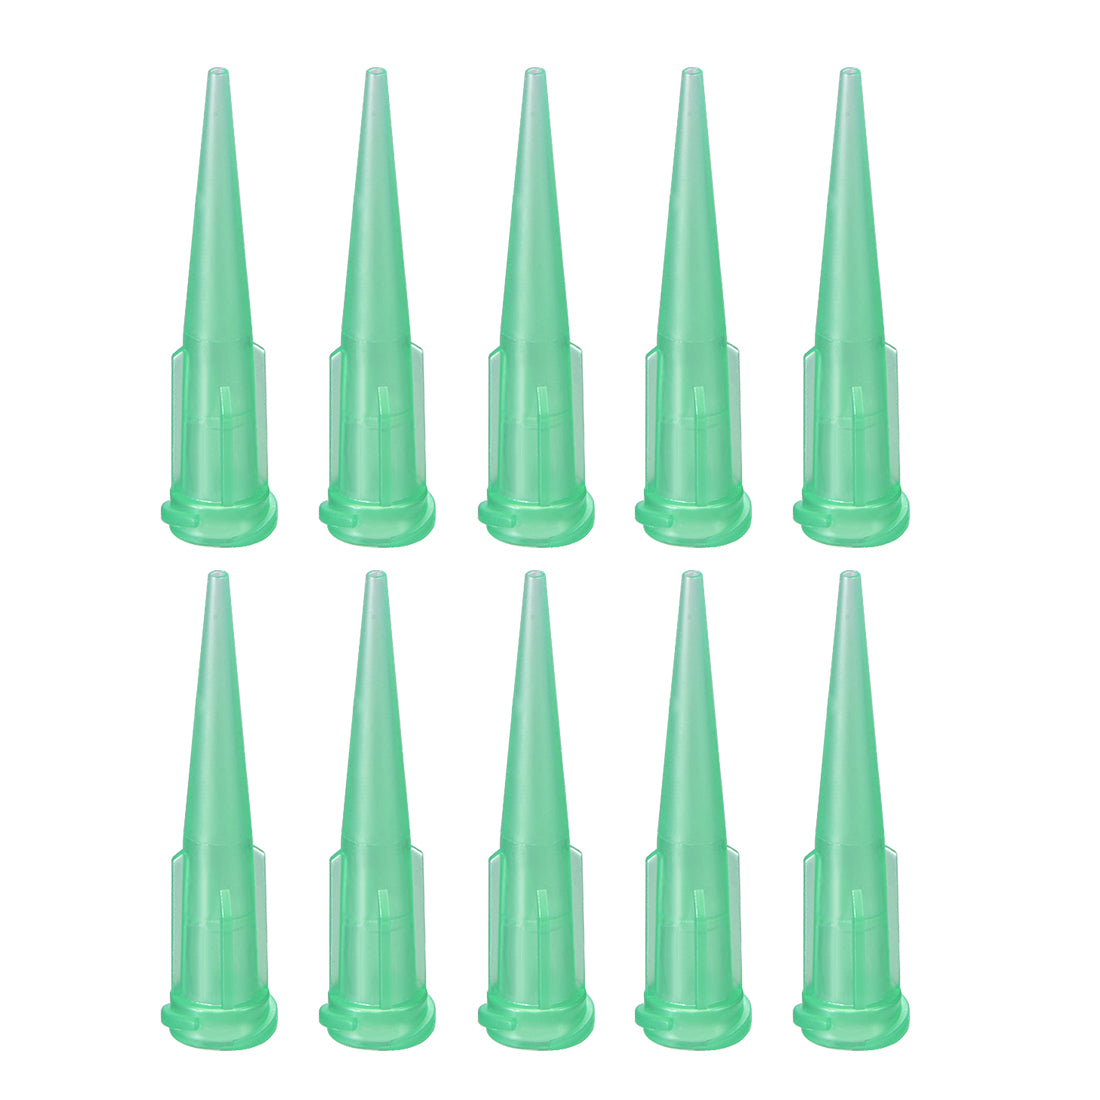 uxcell Uxcell Industrial Blunt Tip Tapered Dispensing Fill Needle 18ga X 1.26" Green 10pcs